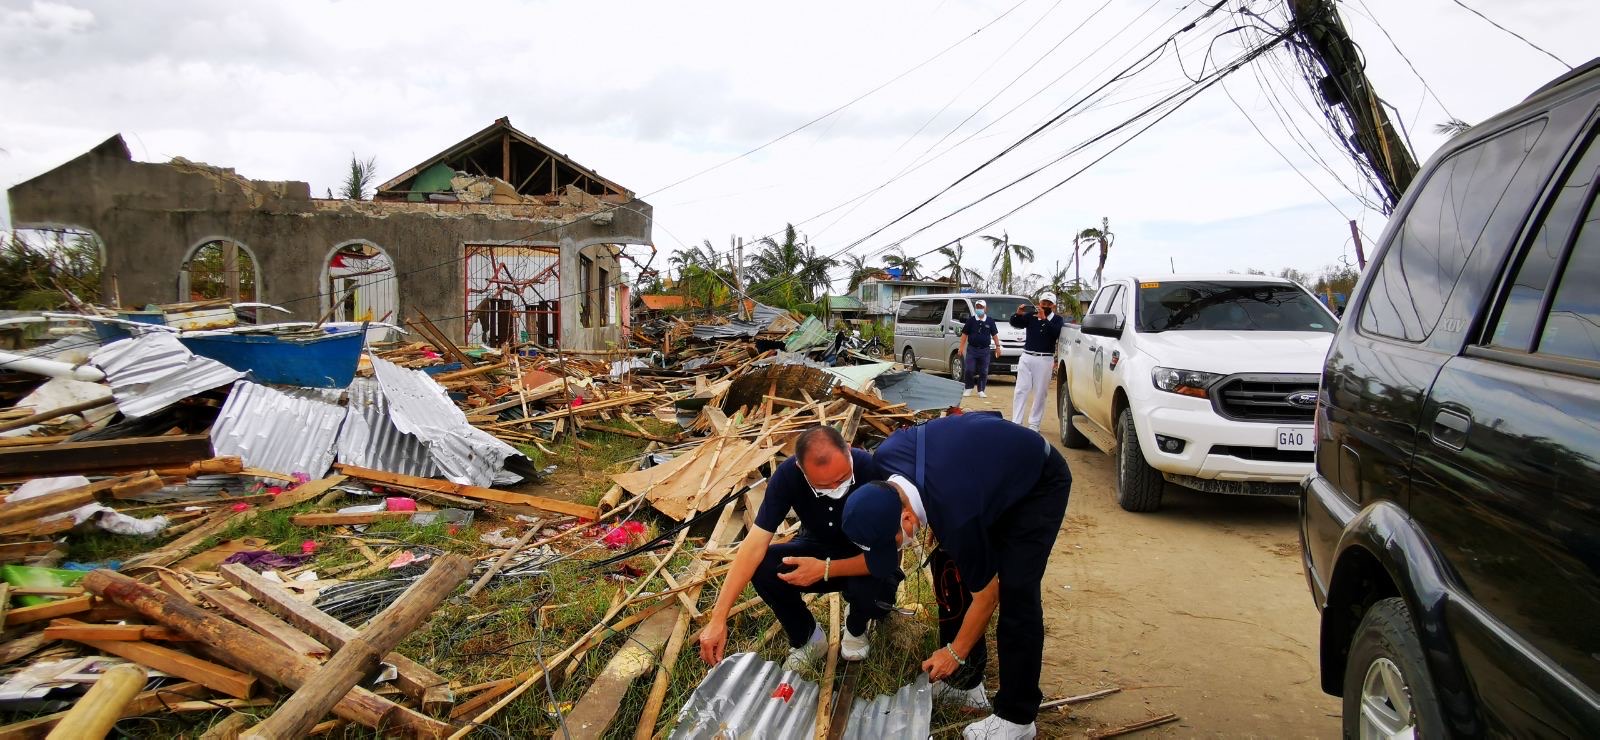 Tzu Chi volunteers check out the roofing material blown away by Odette’s heavy winds. 【Photo by Johnny Kwok】